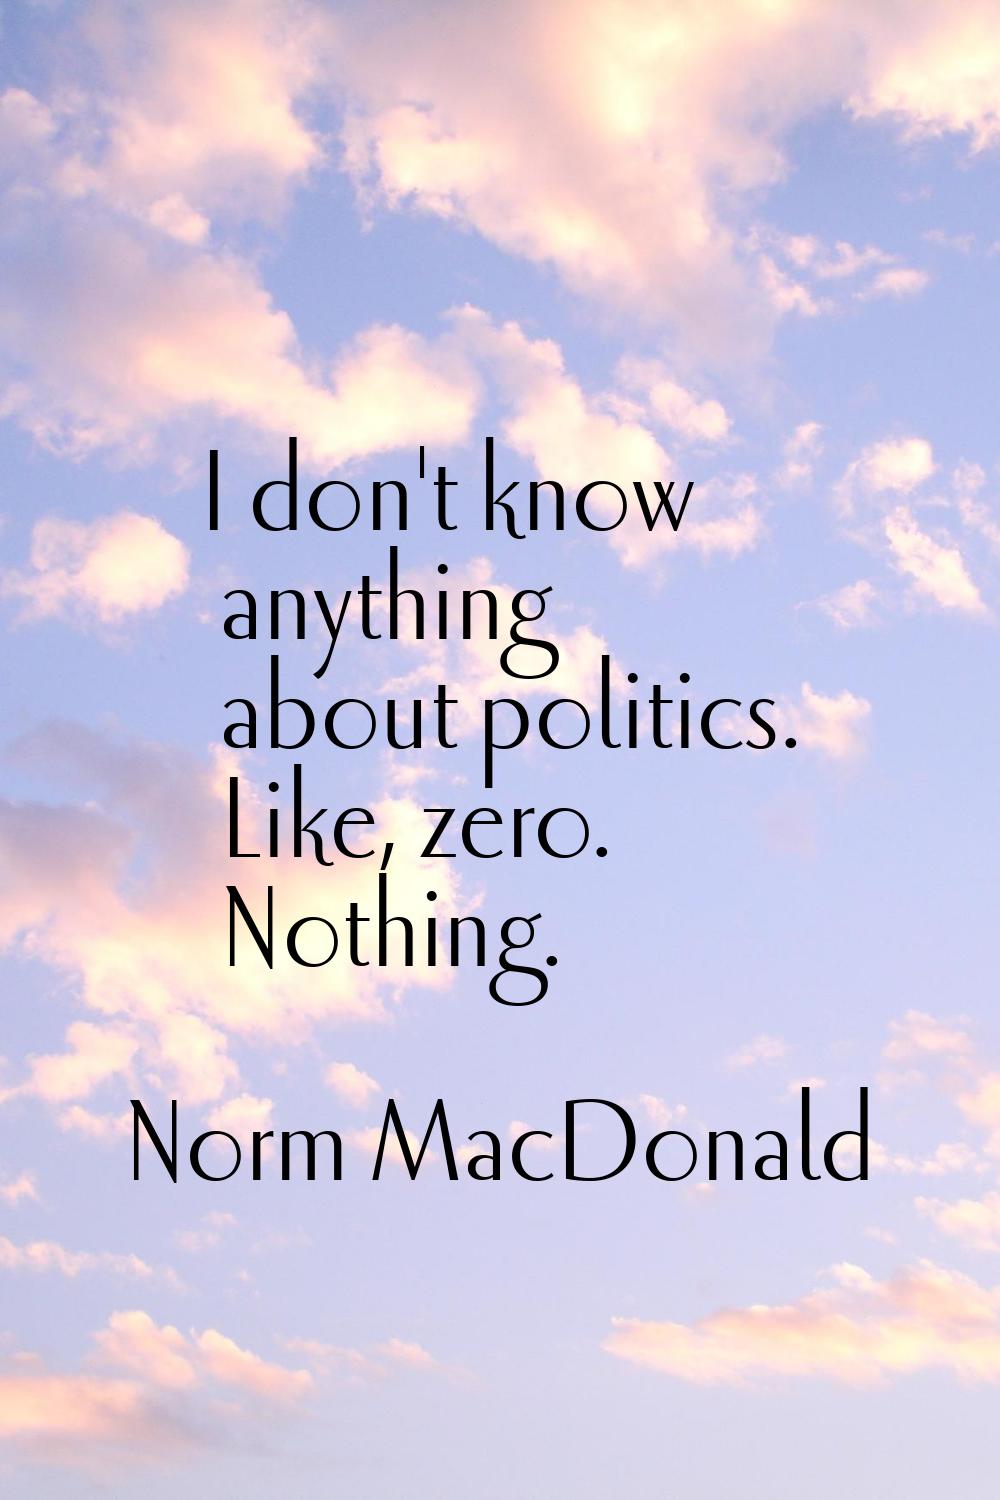 I don't know anything about politics. Like, zero. Nothing.